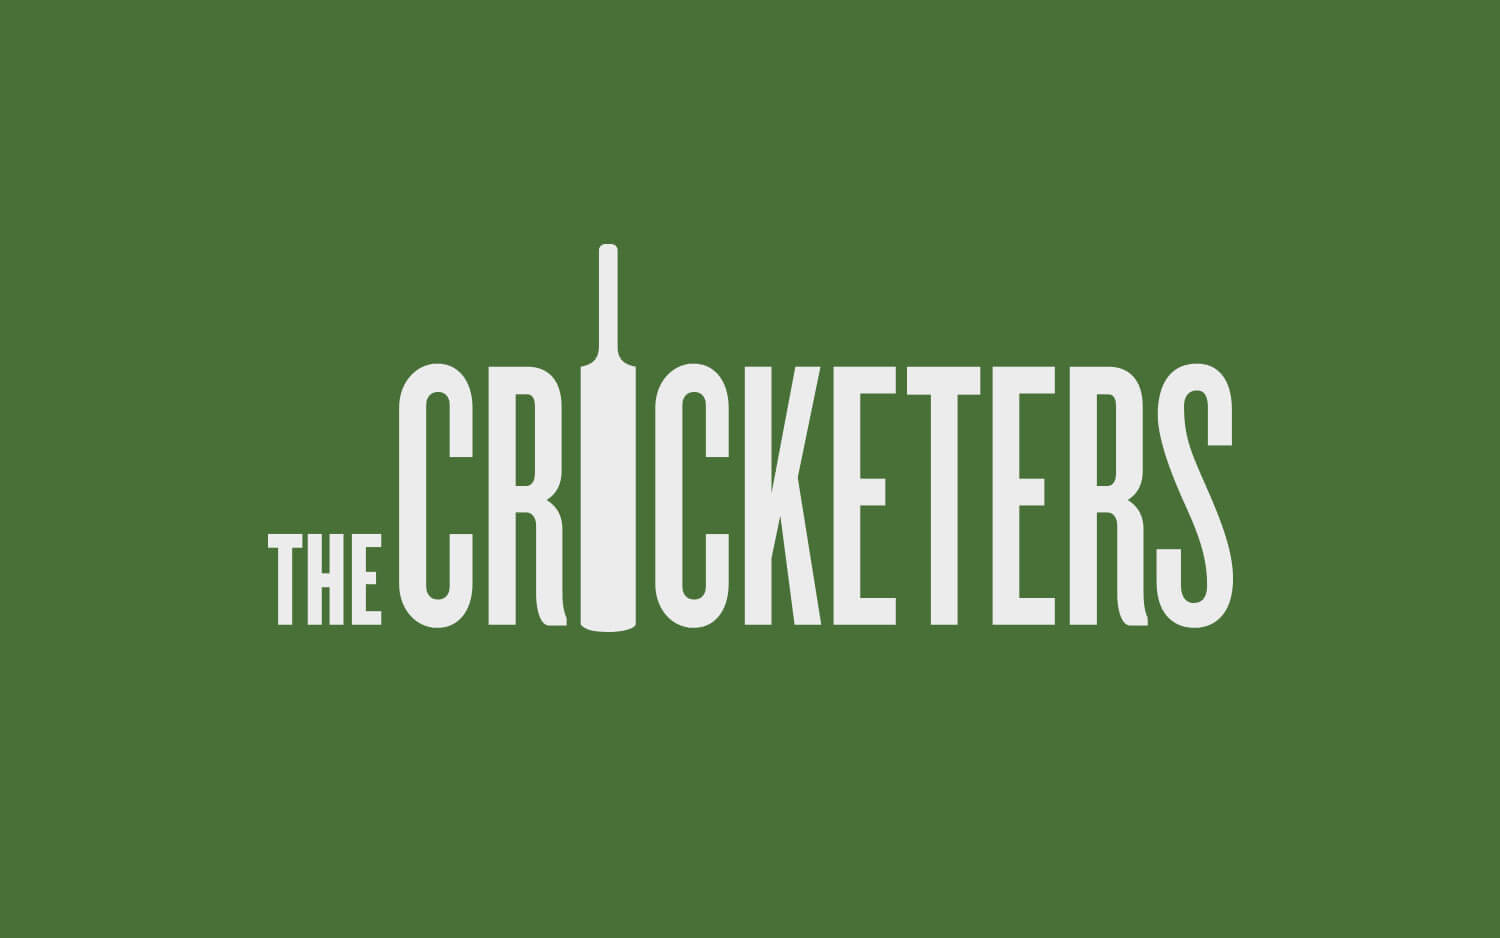 snt-logos-16-cricketers